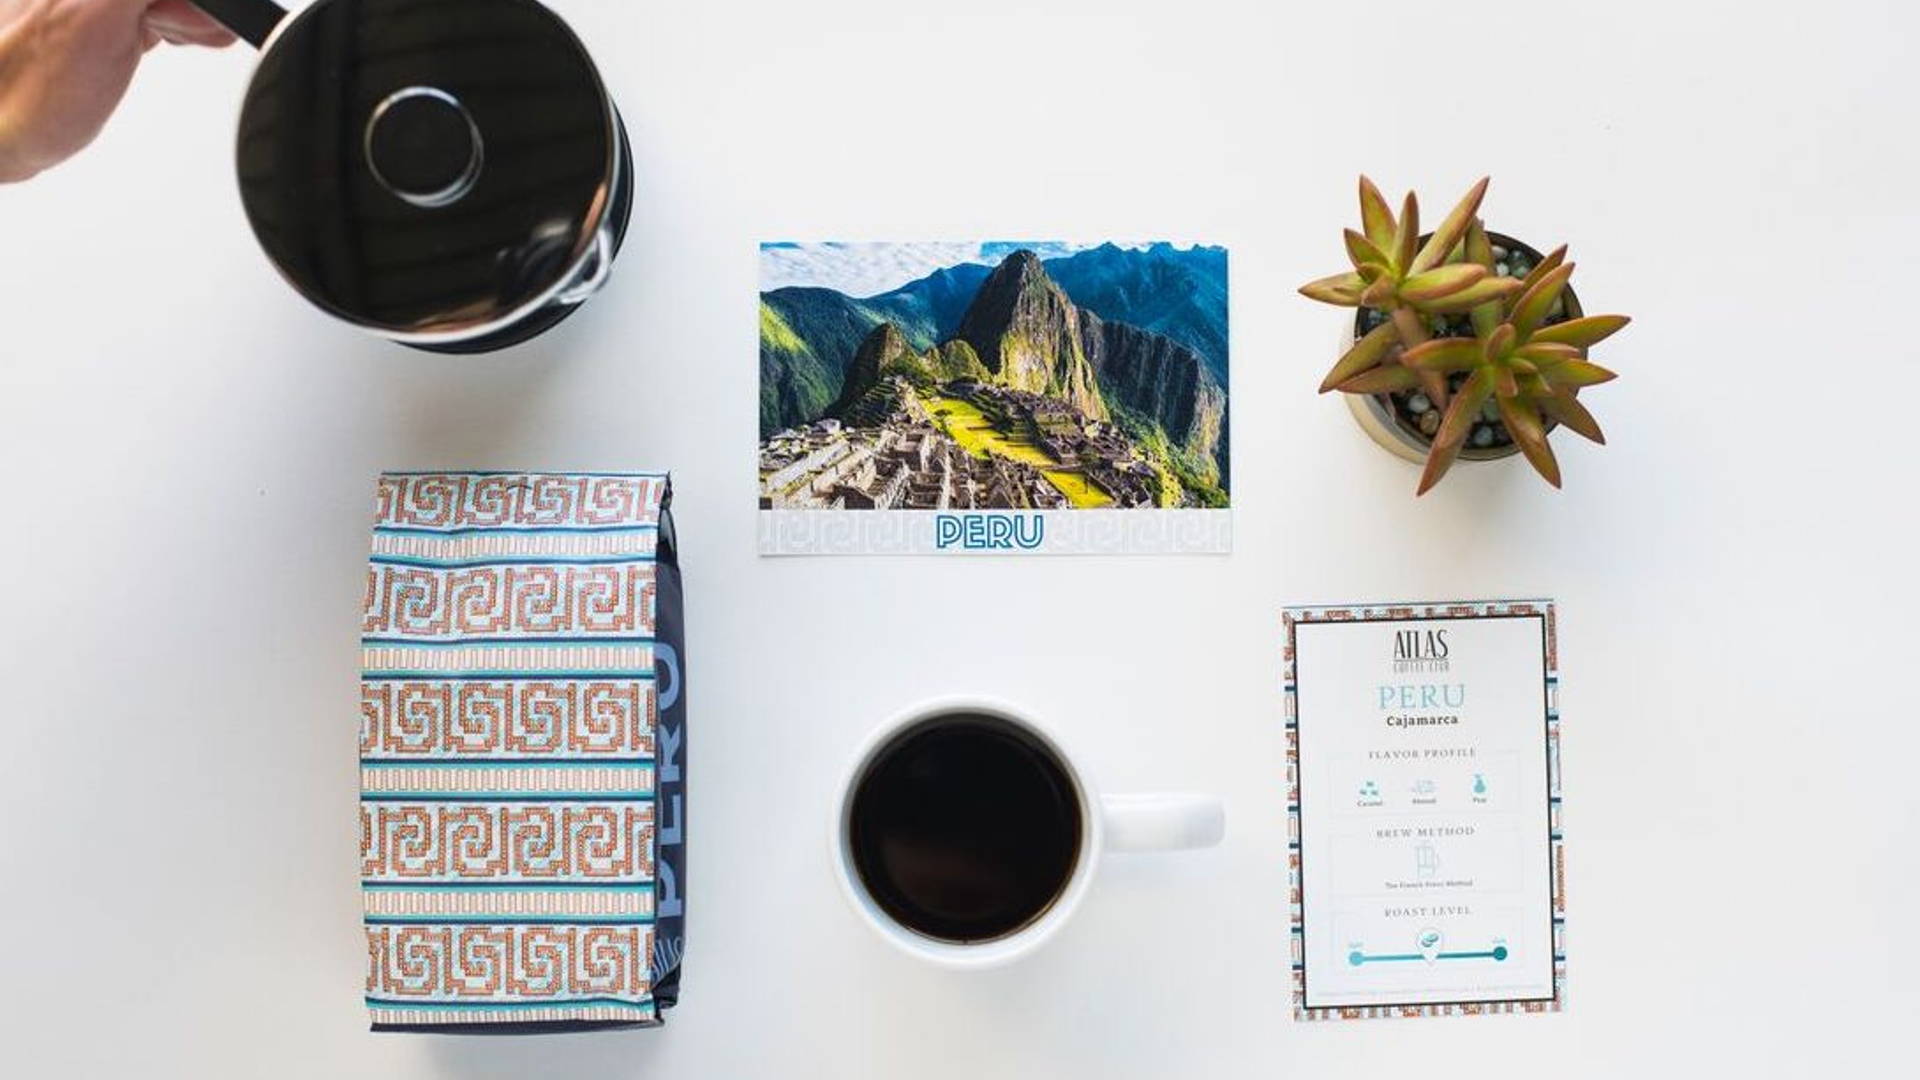 Featured image for Atlas Coffee Club Packaging Takes You on a Caffeinated Journey Around the World